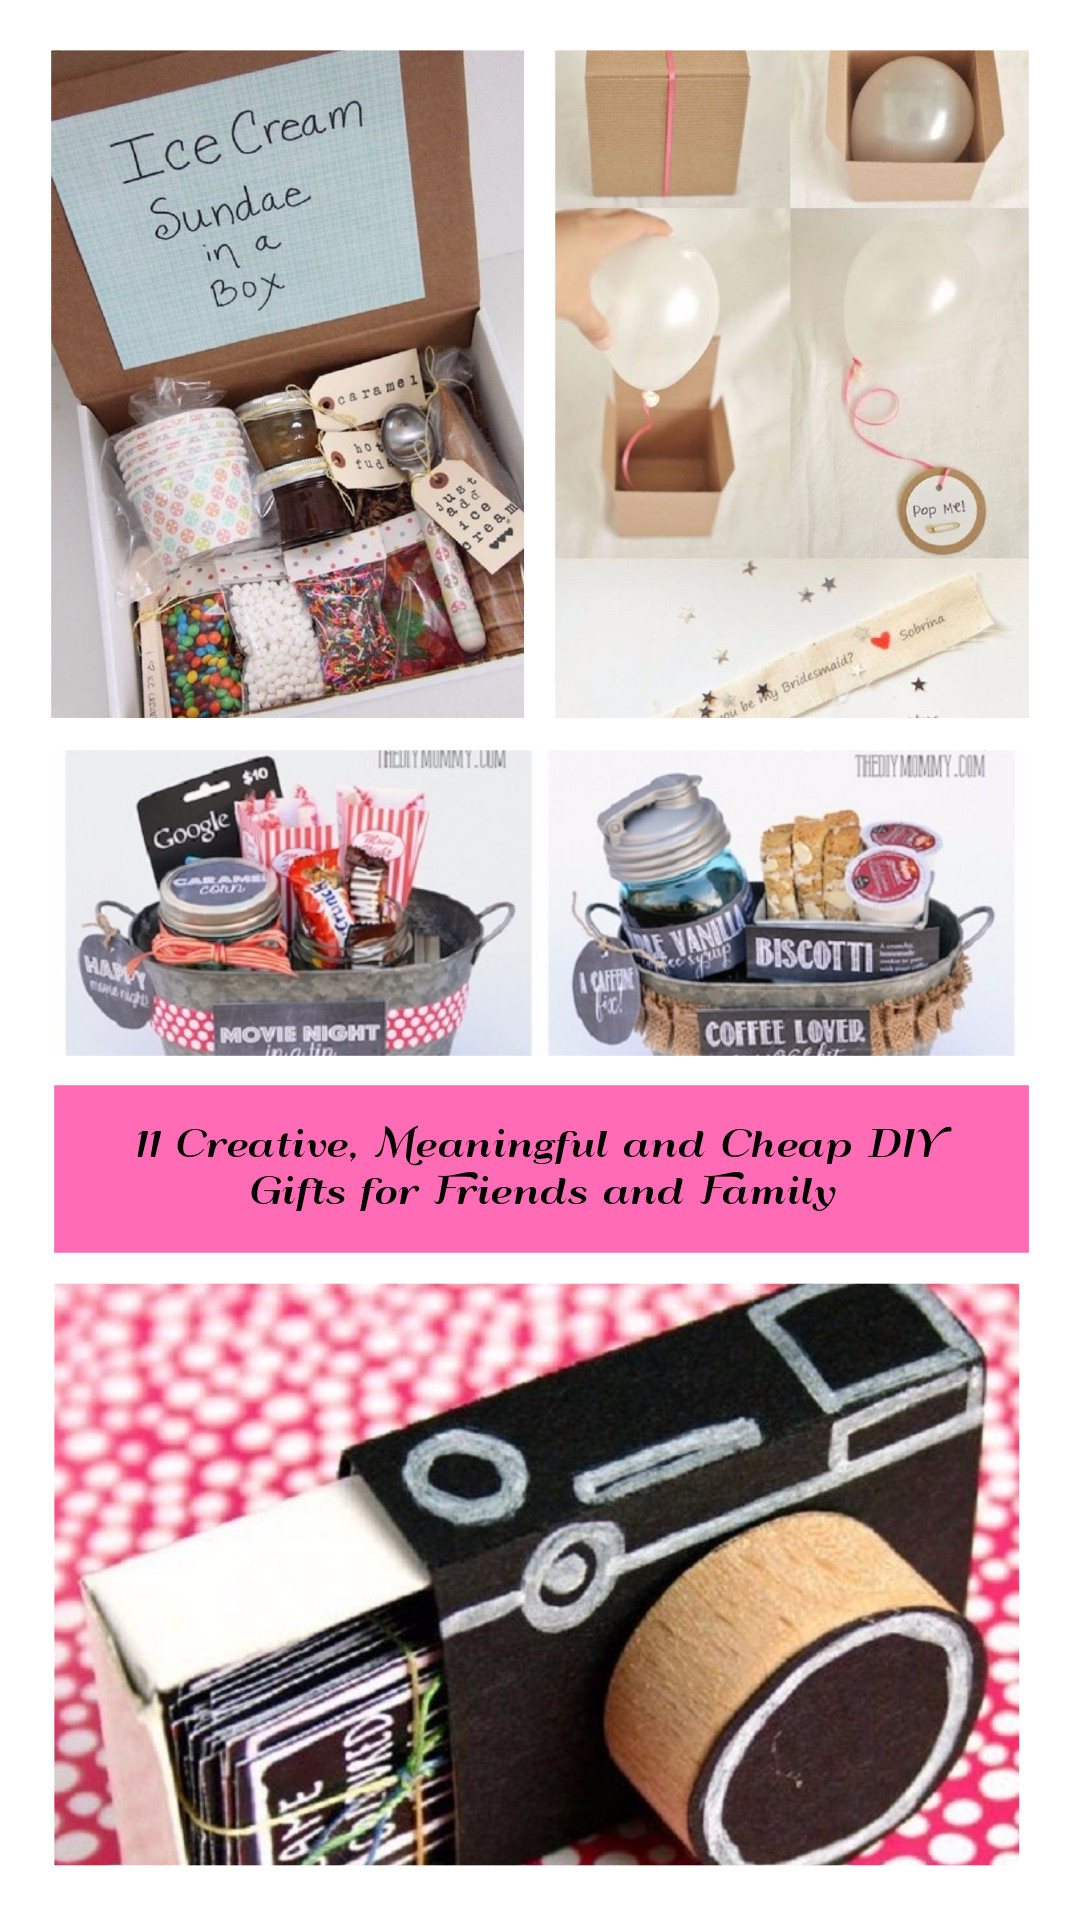 DIY Meaningful Gifts
 11 Creative Meaningful and Cheap DIY Gifts for Friends